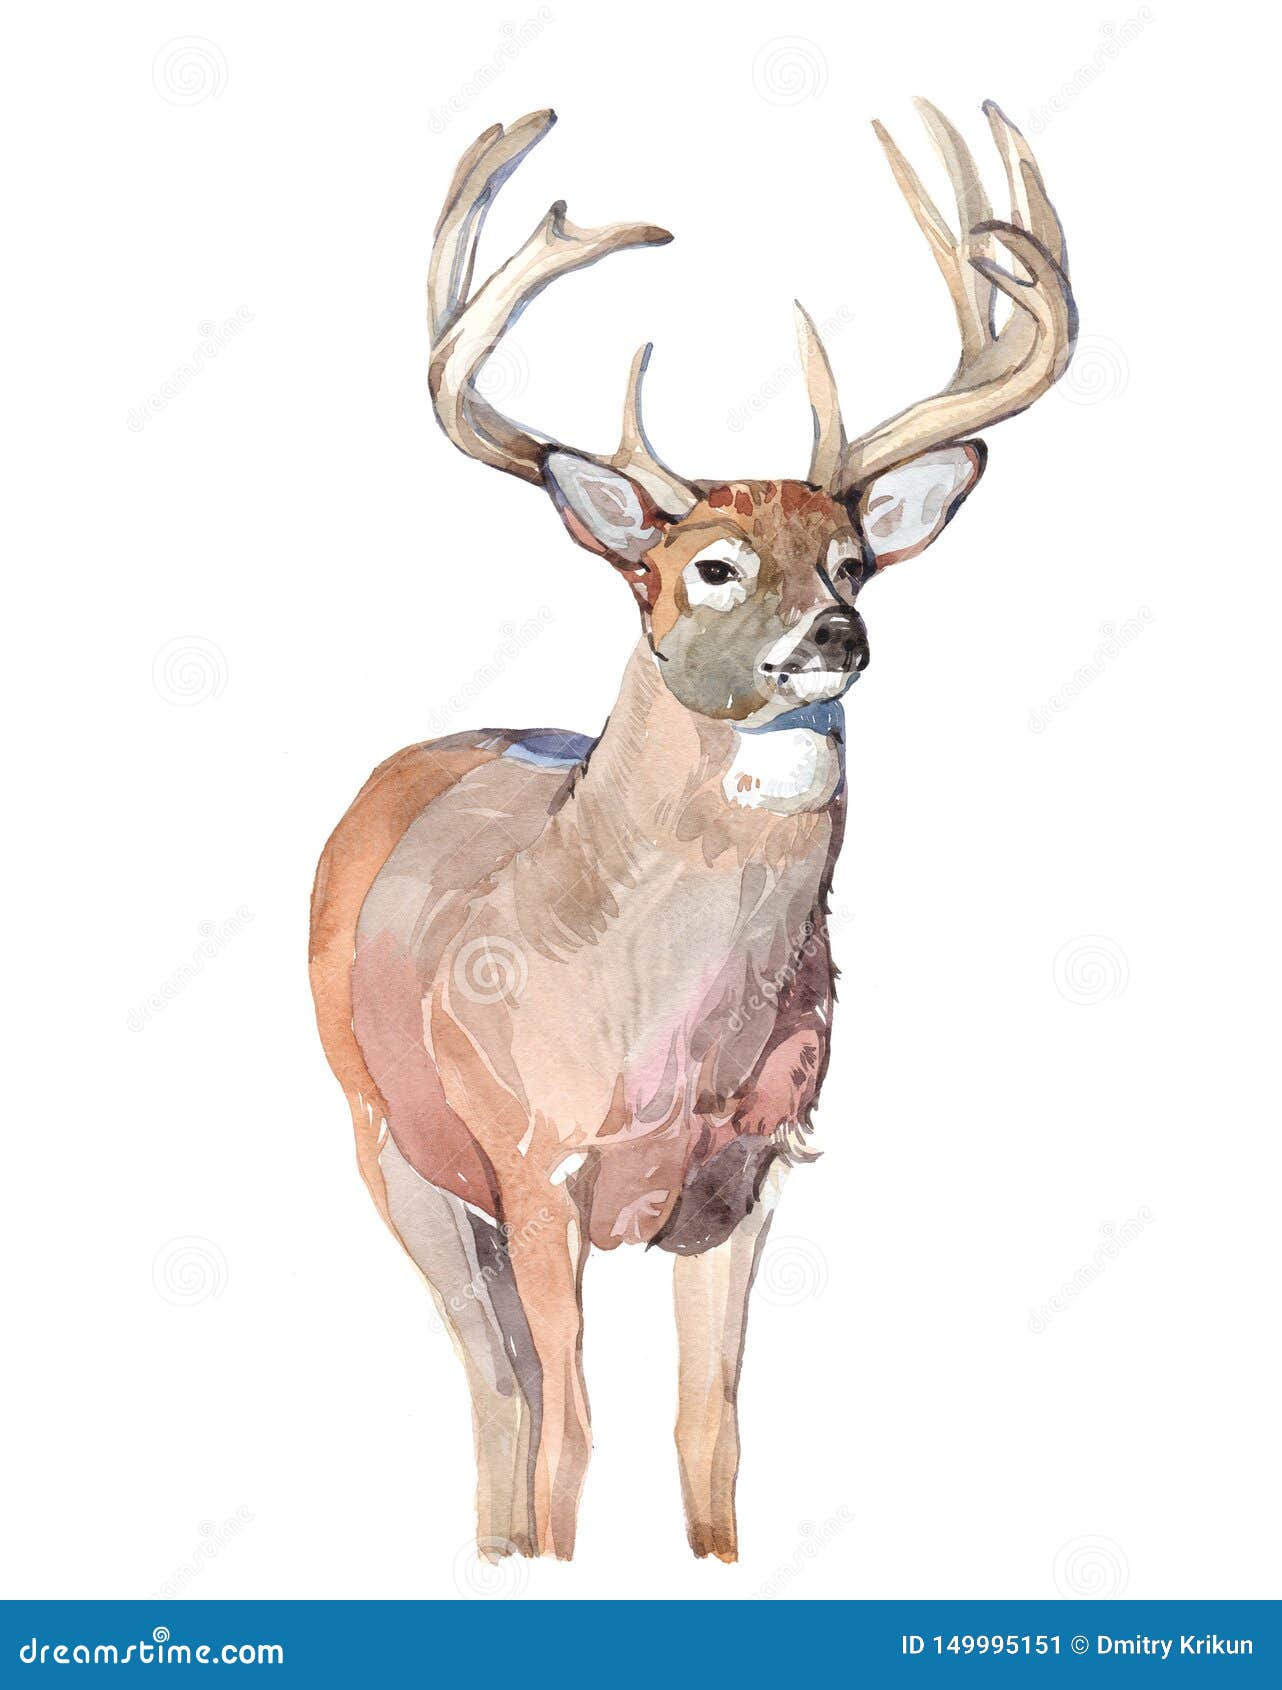 Free: Cute baby deer looking at front vector illustration Free Vector -  nohat.cc